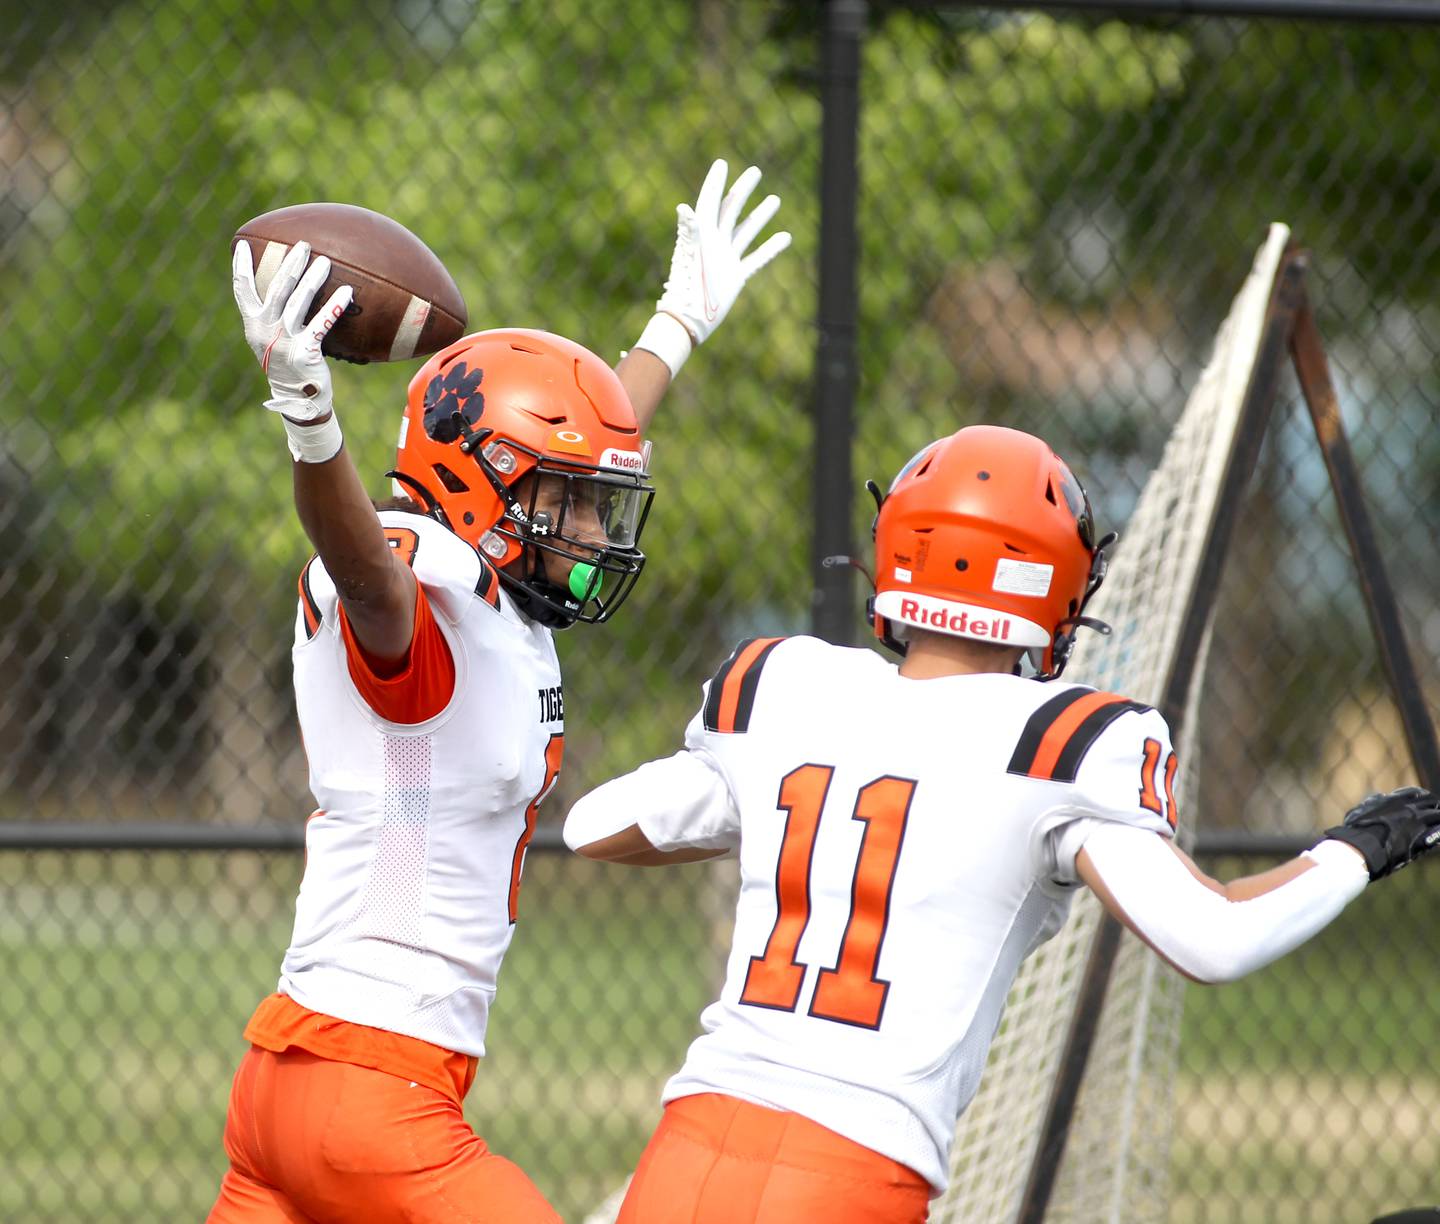 Wheaton Warrenville South’s Braylen Meredith (left) celebrates a touchdown during a game against Simeon at Gately Stadium in Chicago on Saturday, Aug. 27, 2022.